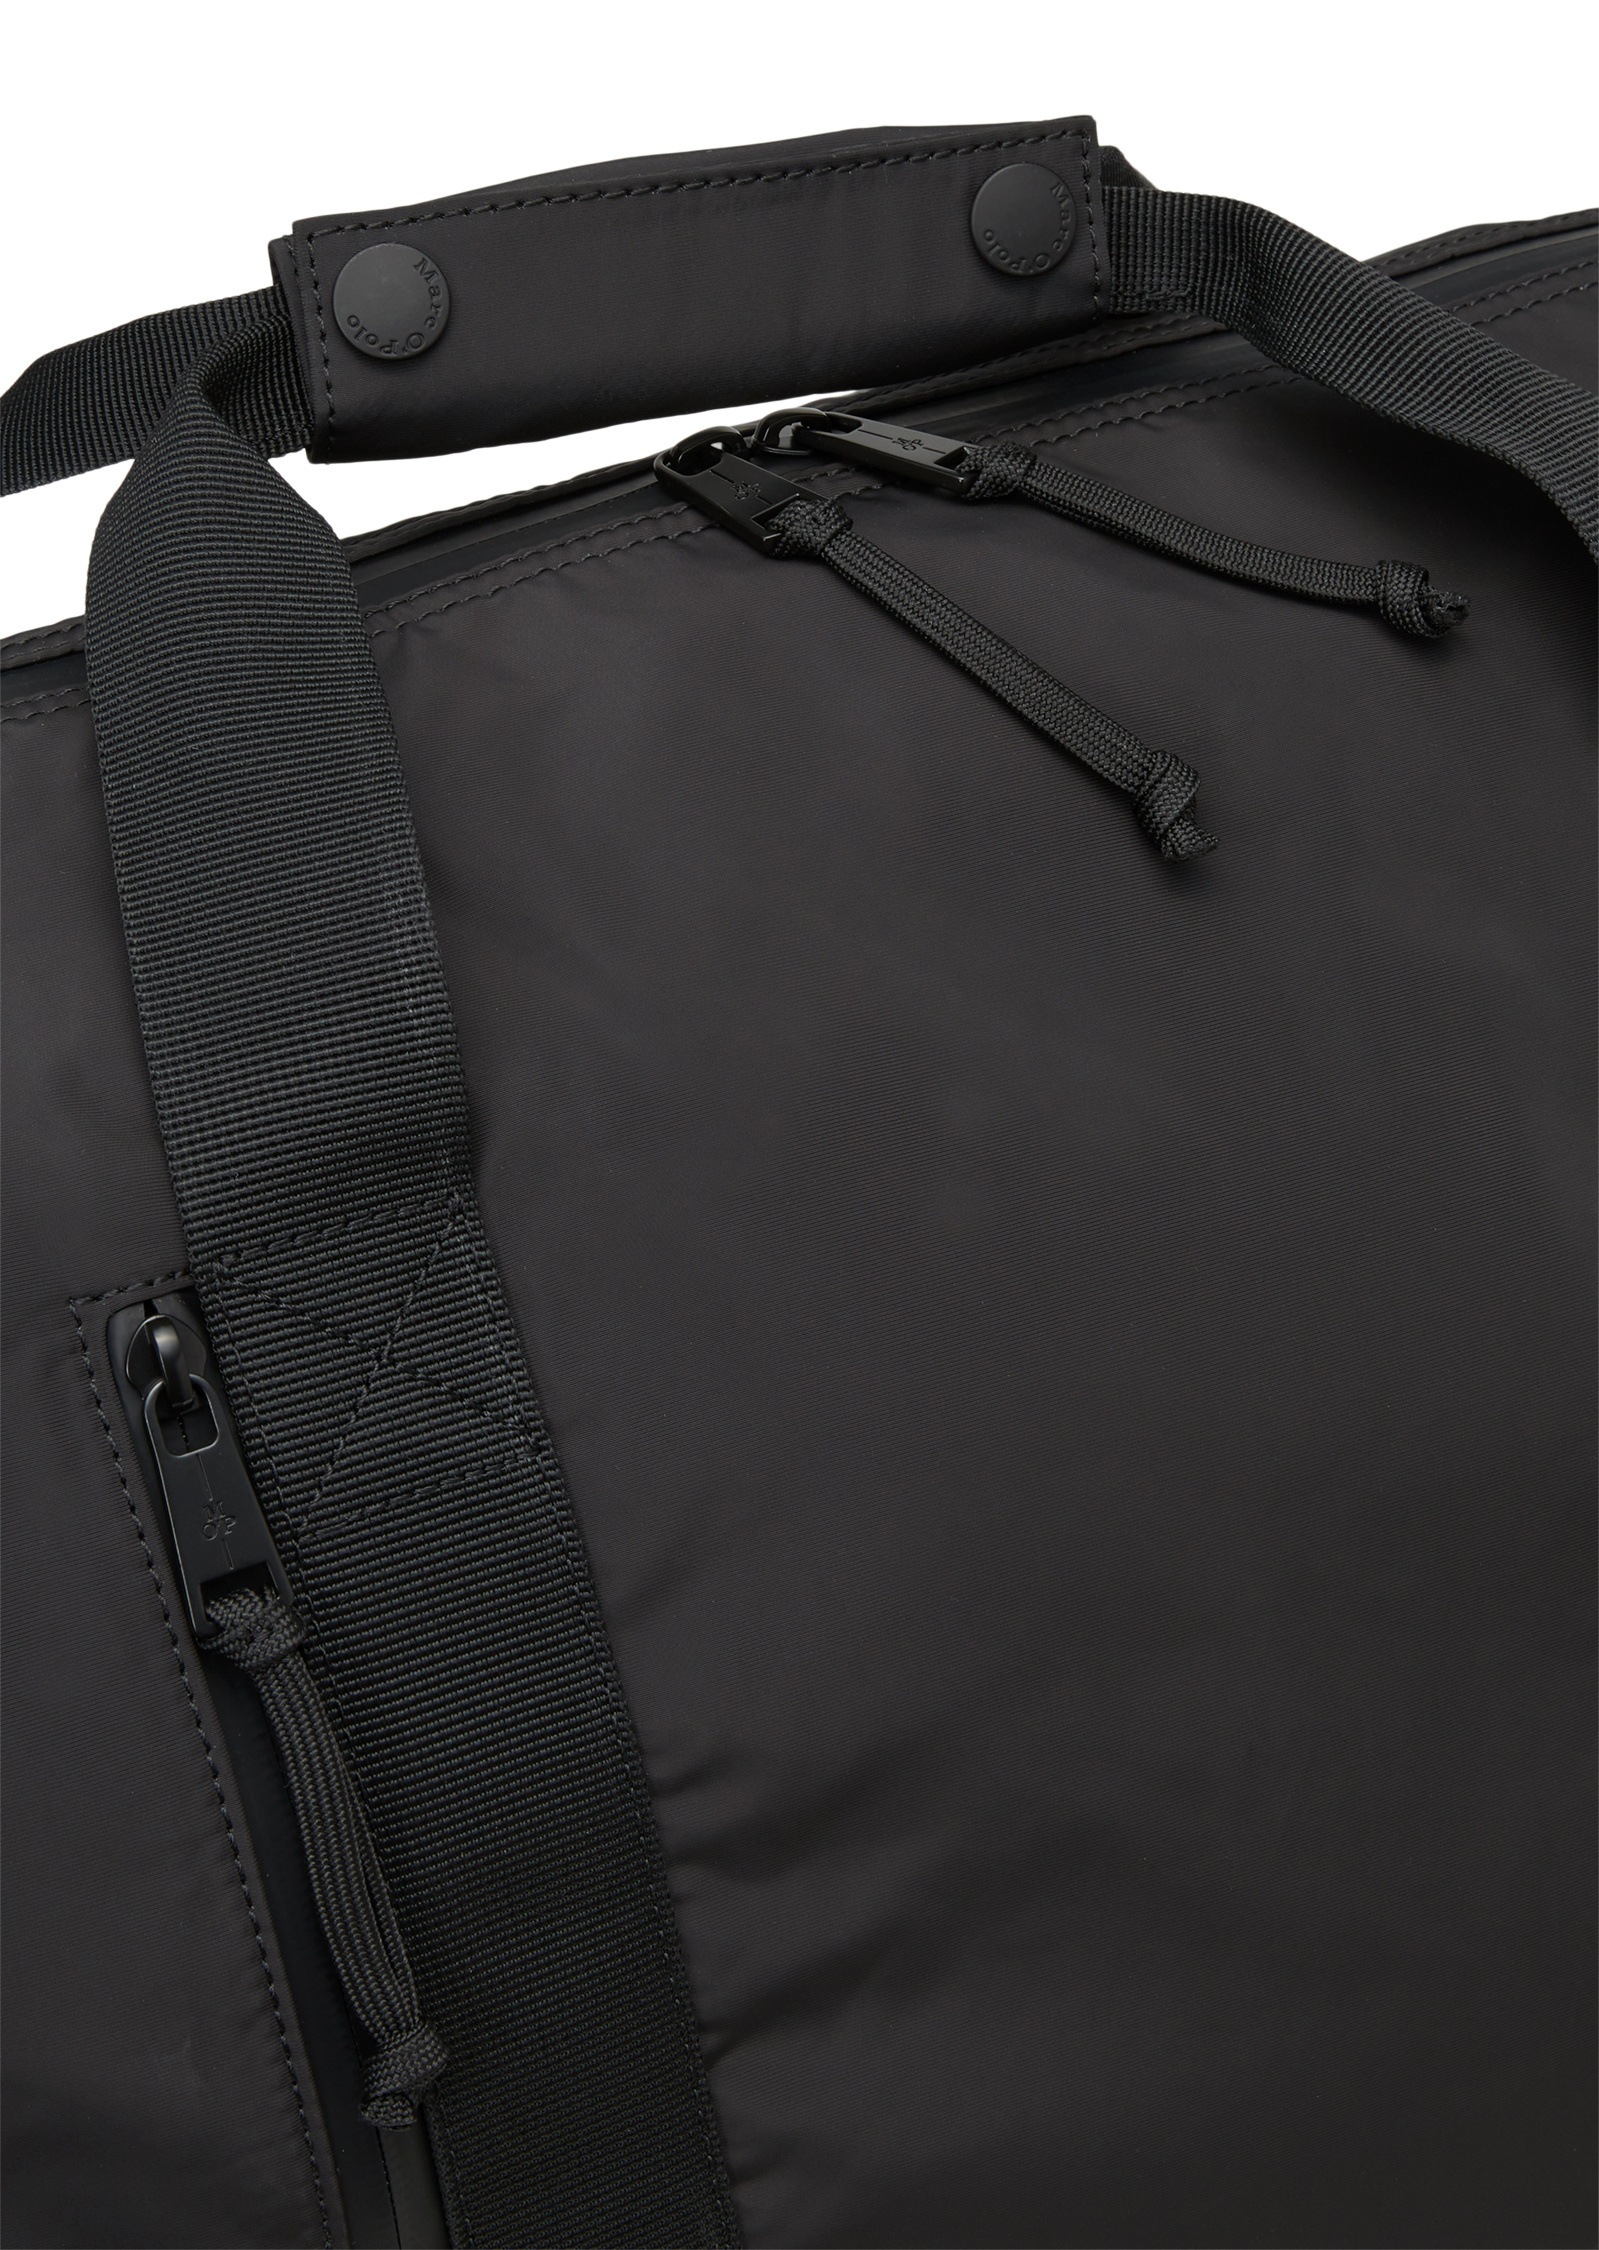 Marc O'Polo Weekender »aus recyceltem Polyester«